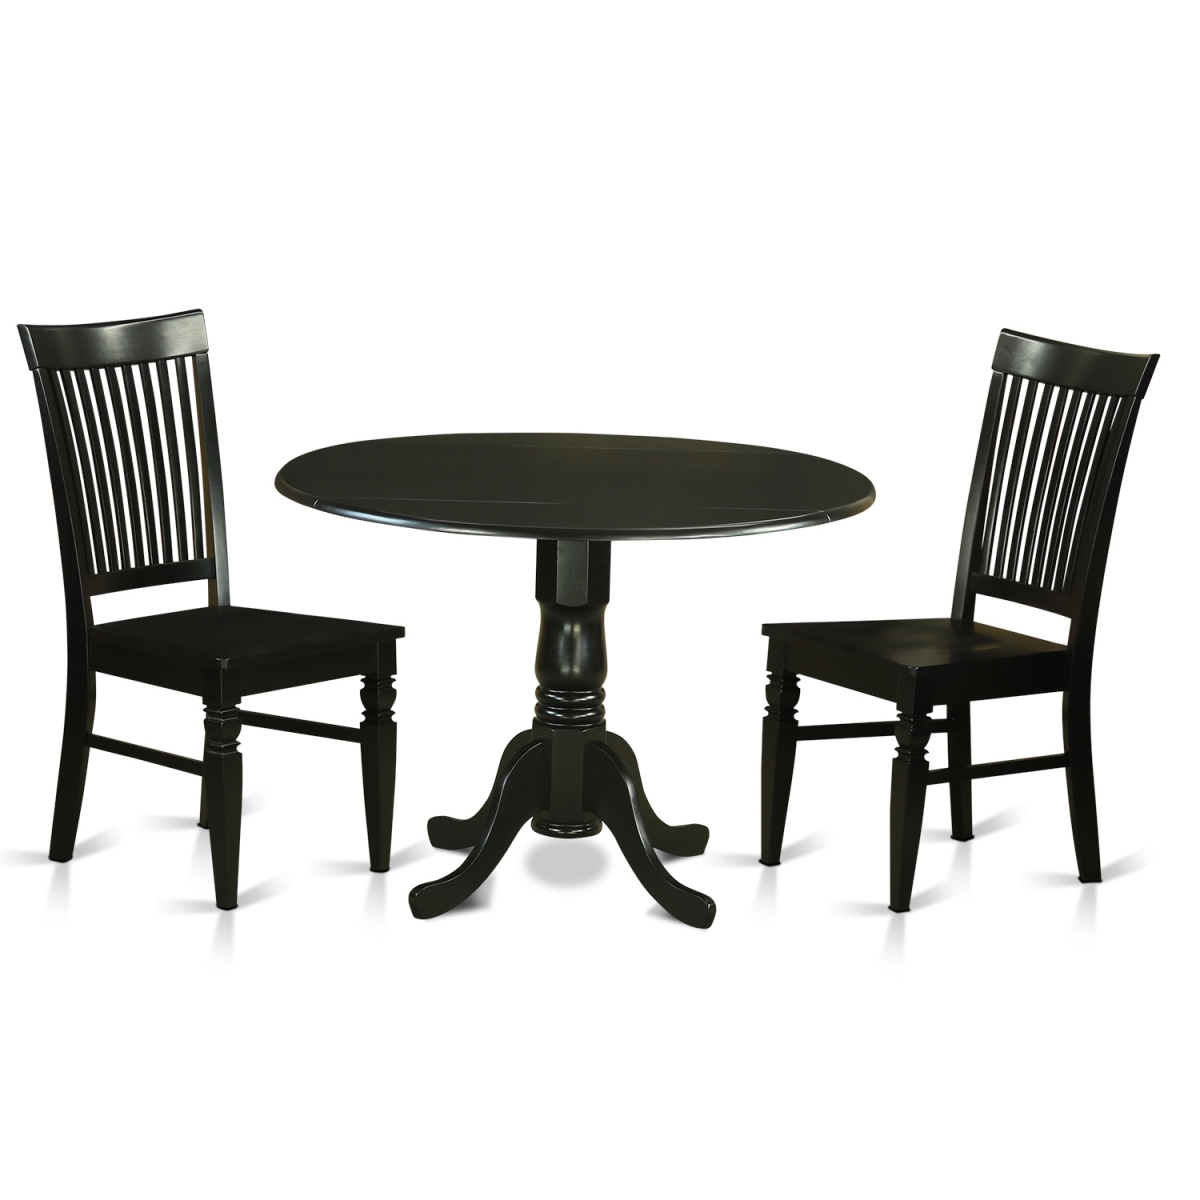 Picture of East West Furniture DLWE3-BLK-W Table Set - Table & 2 Chairs, Black - 3 Piece